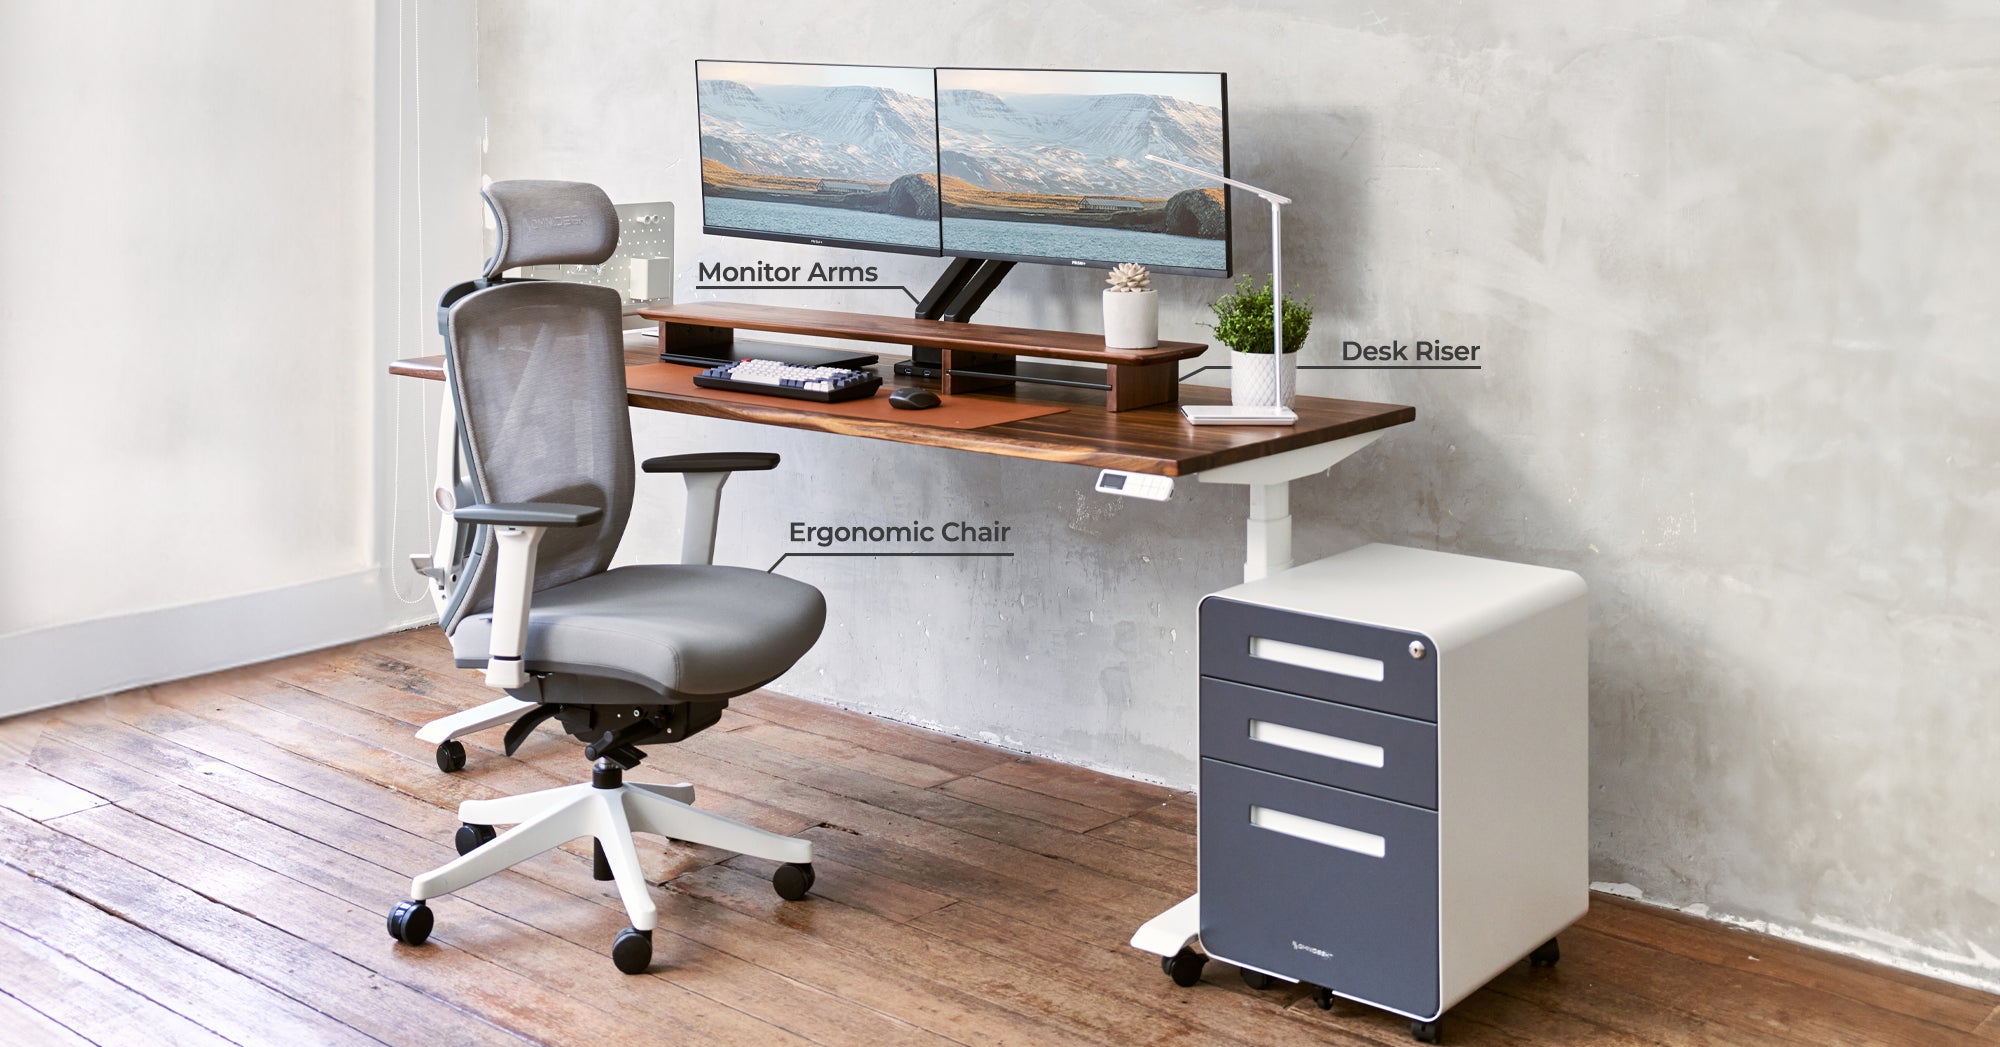 Must-have desk accessories to go with your standing desk